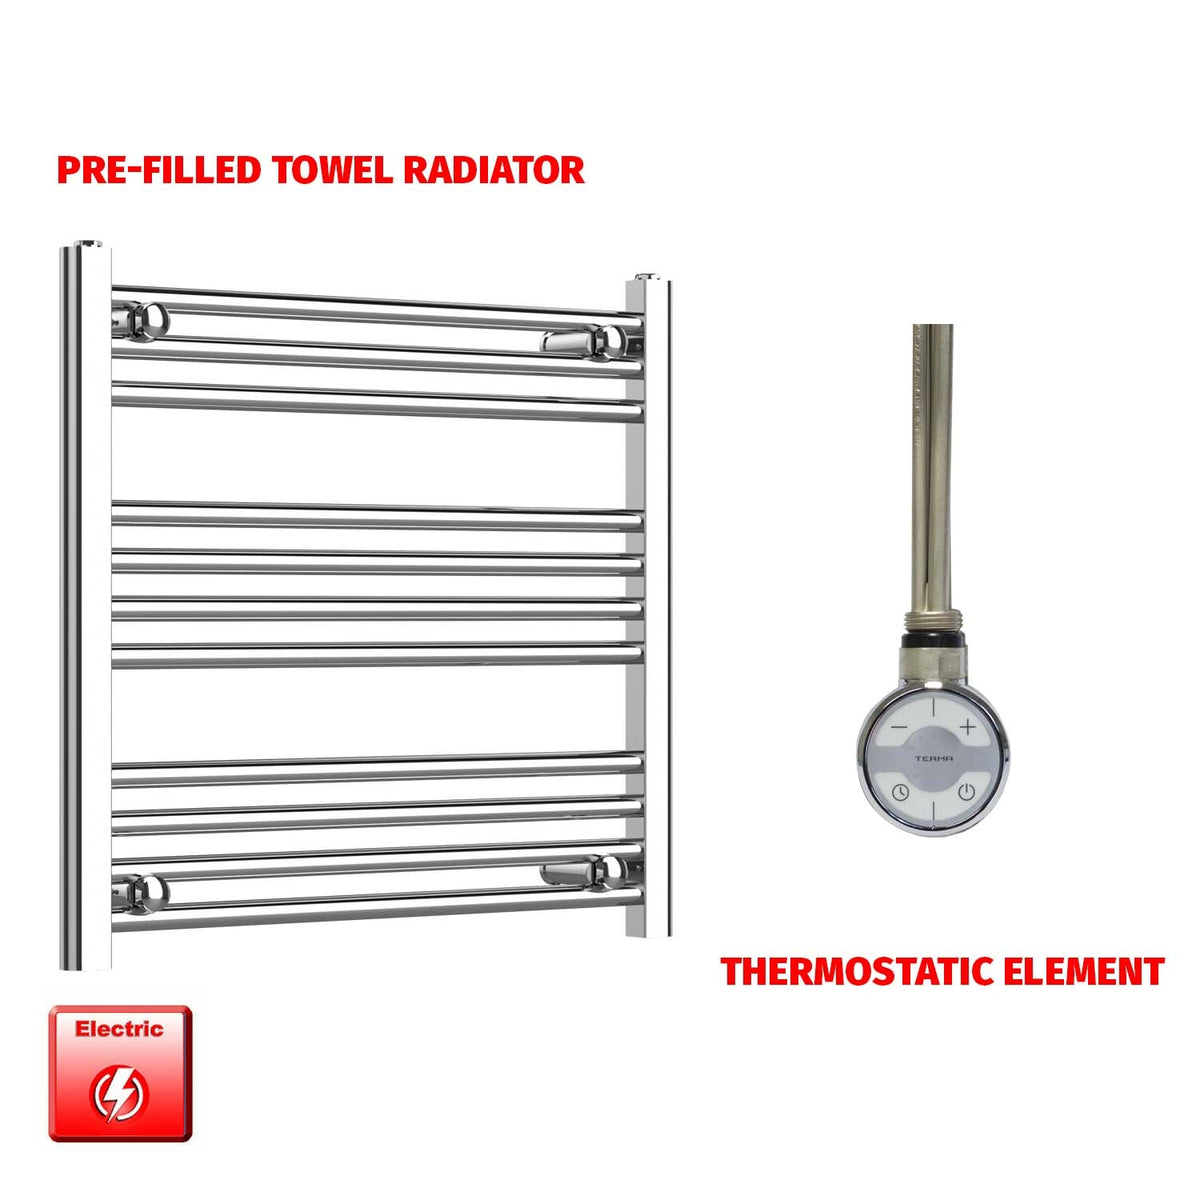 600mm High 650mm Wide Pre-Filled Electric Heated Towel Radiator Straight Chrome